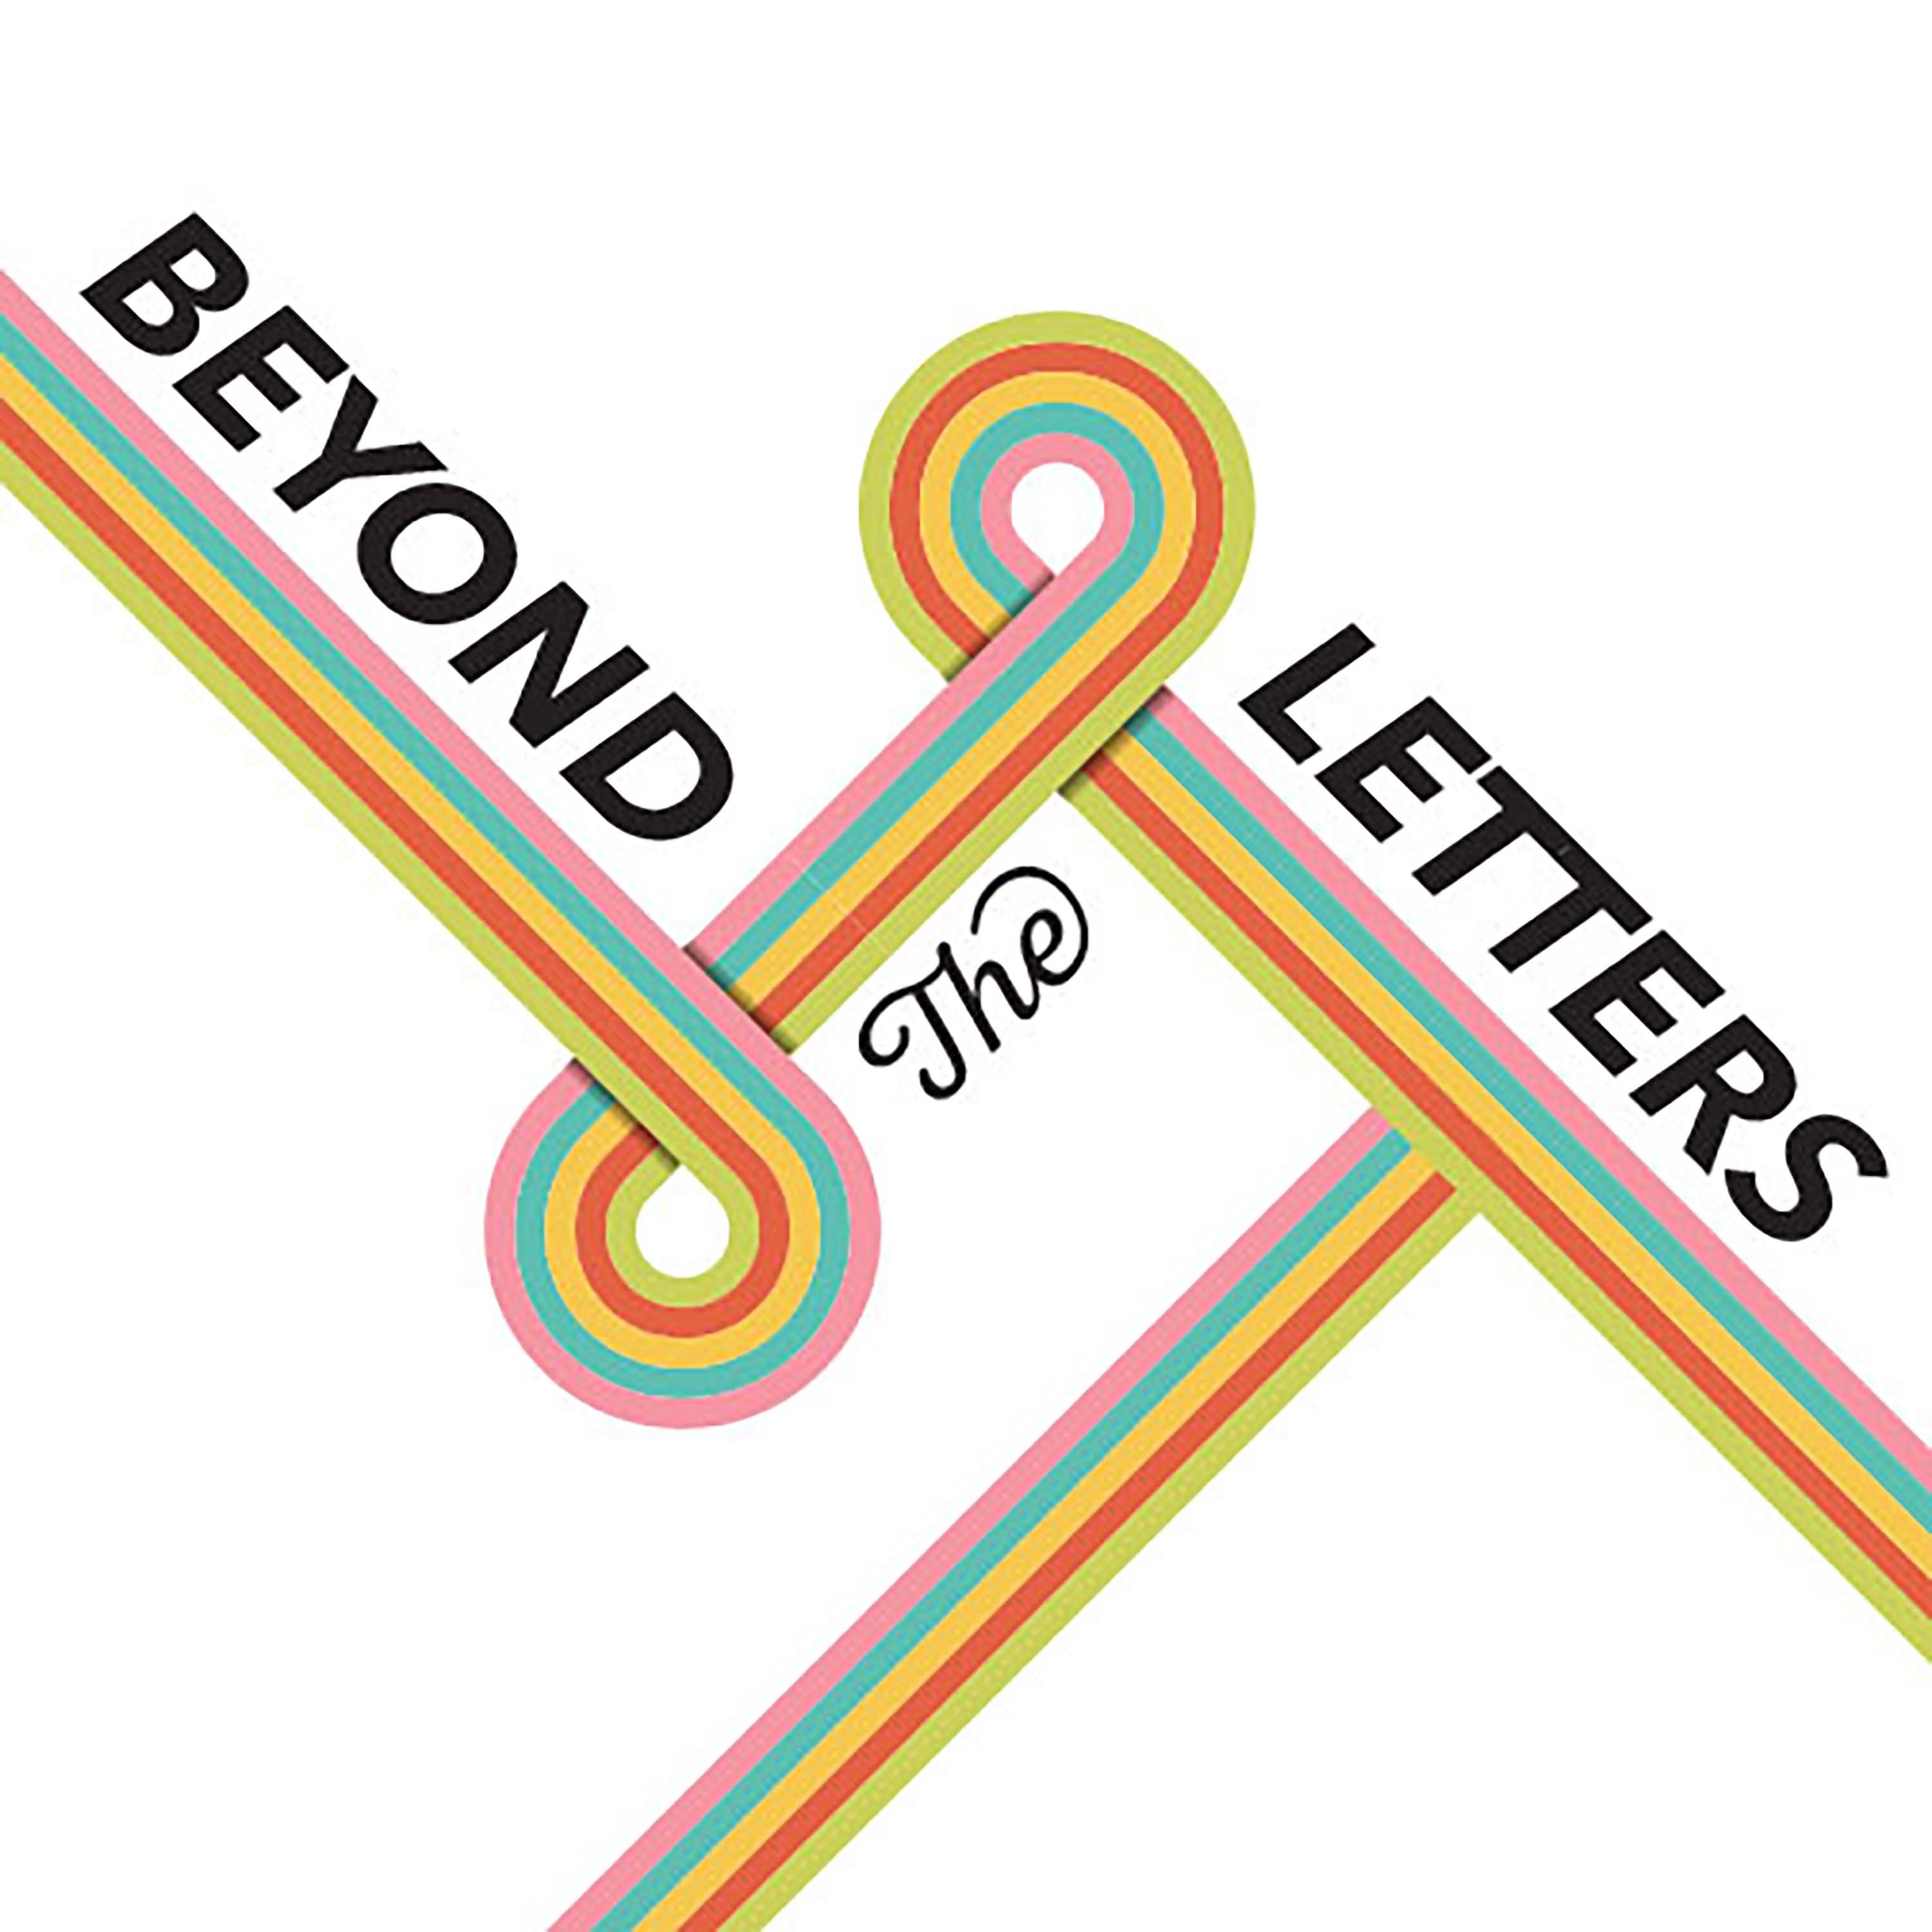 Beyond the Letters: Being a Stronger Ally with shea martin